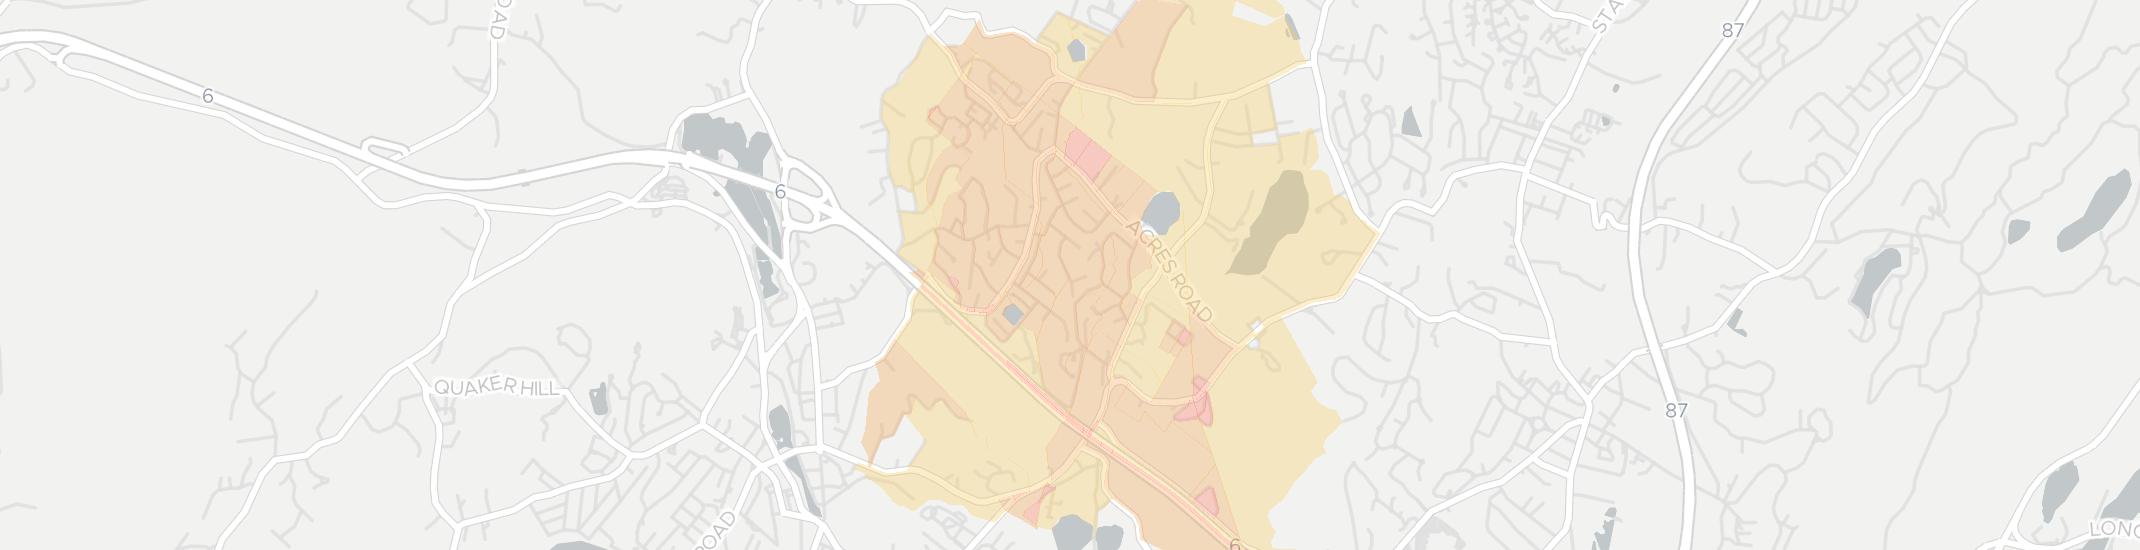 Kiryas Joel Internet Competition Map. Click for interactive map.